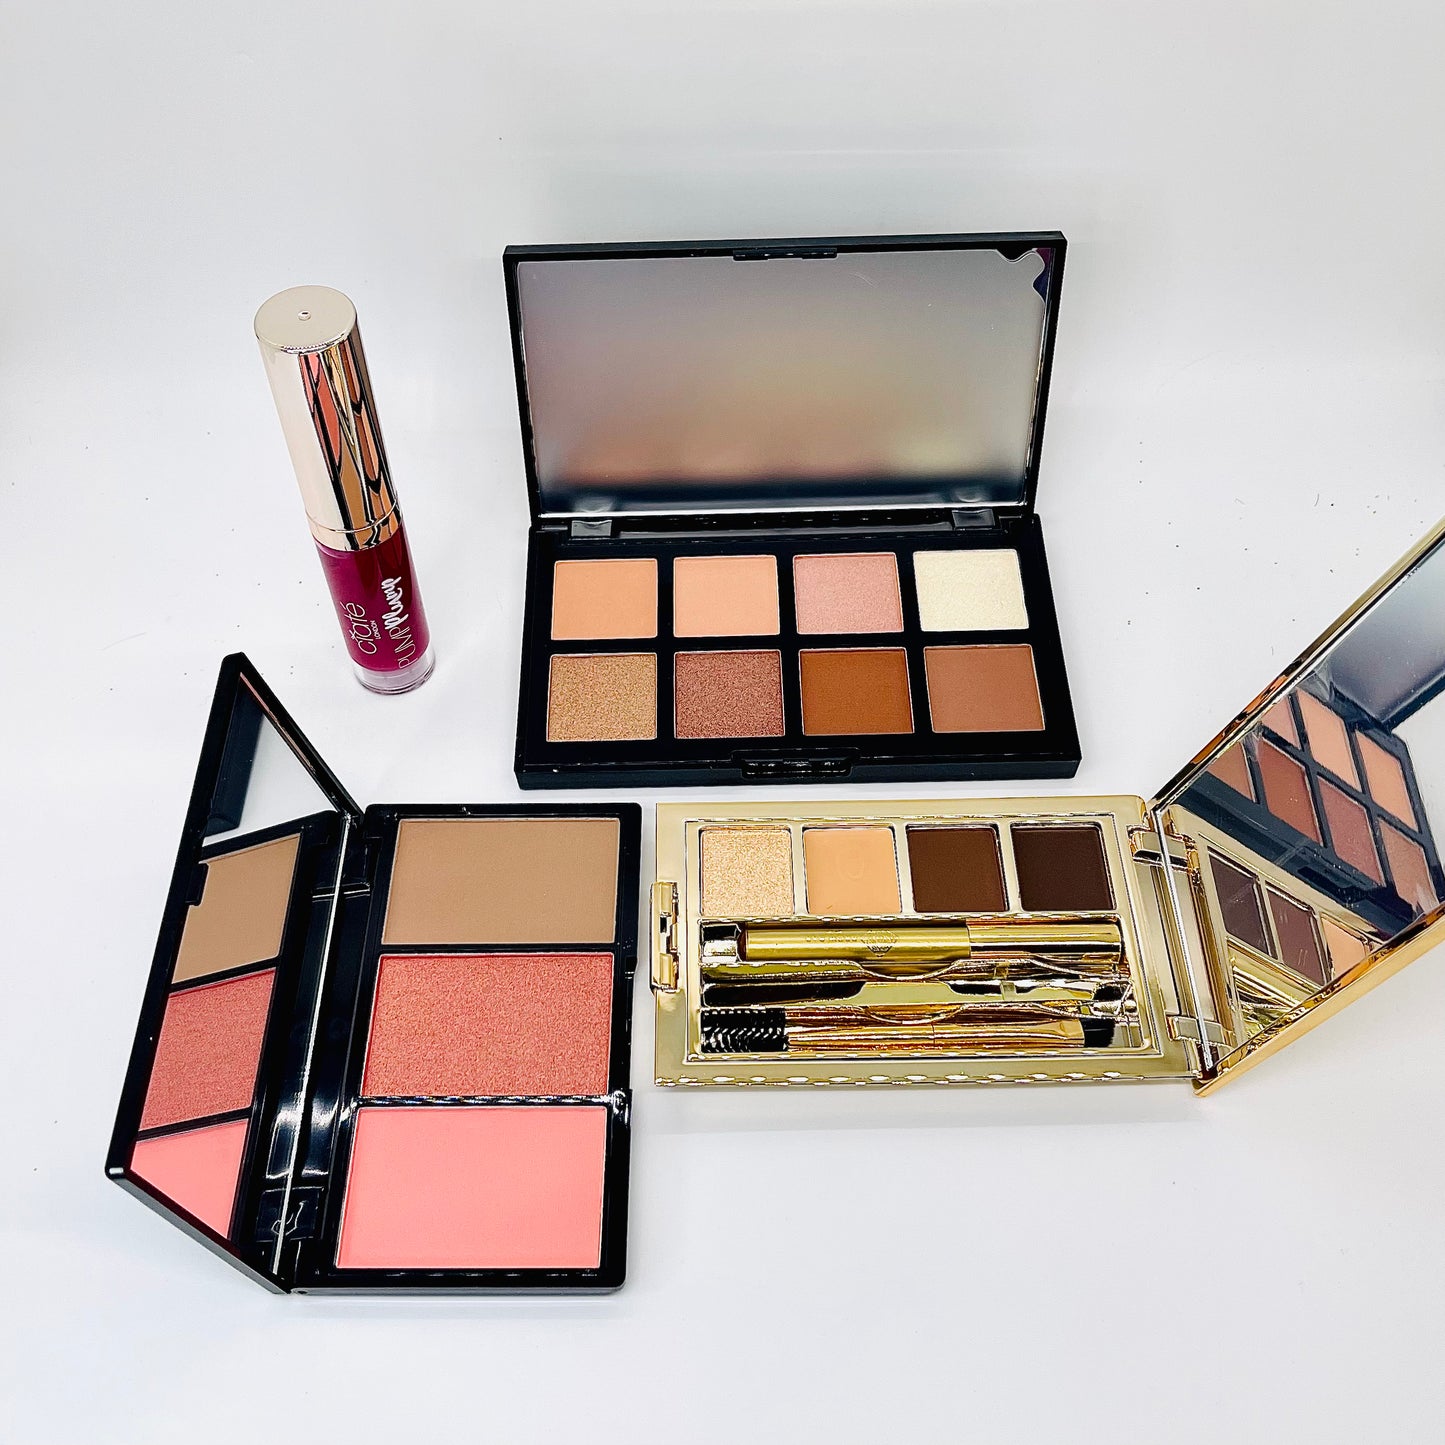 March 2023 Limited Edition Ultimate Glam Beauty Makeup Box